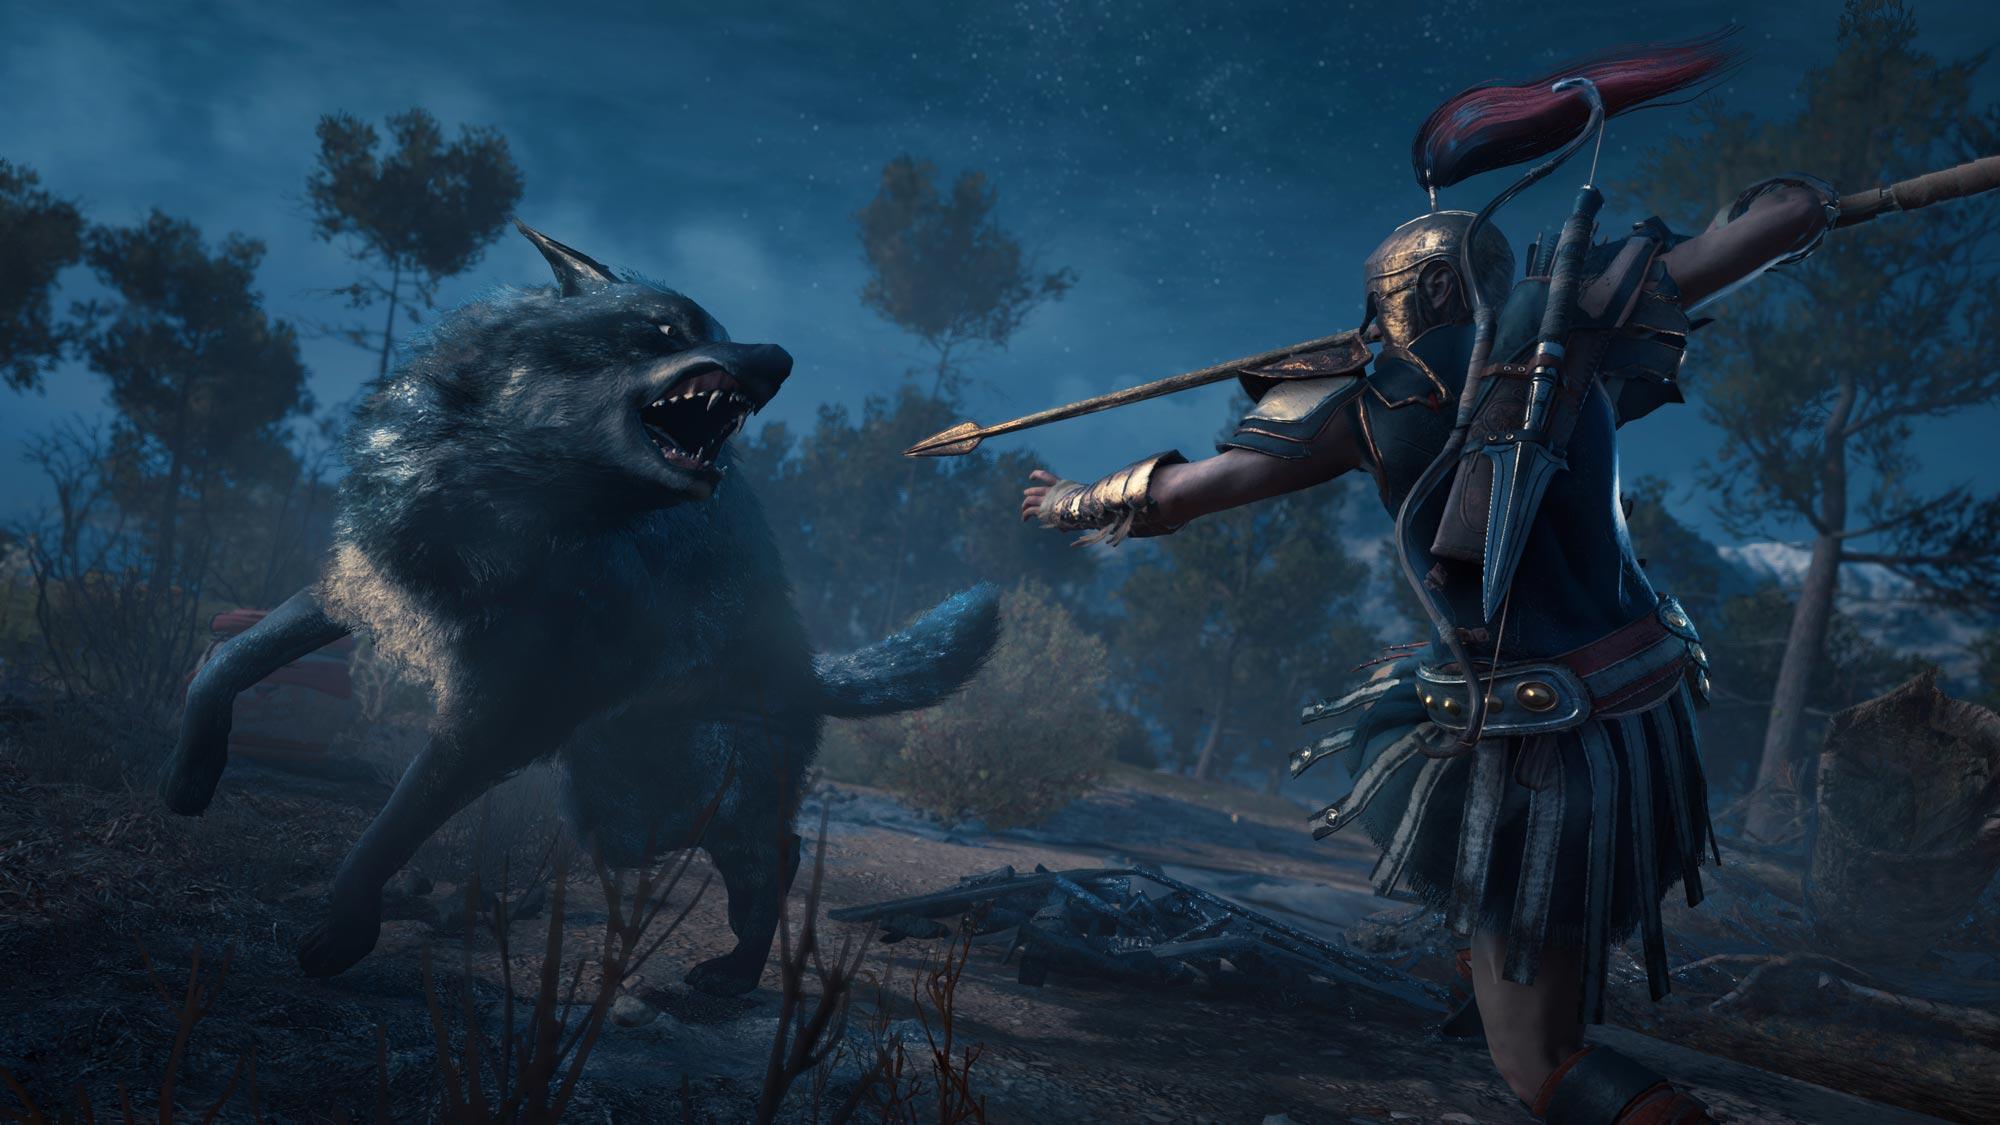 Assassin's Creed Odyssey is the best game in the series